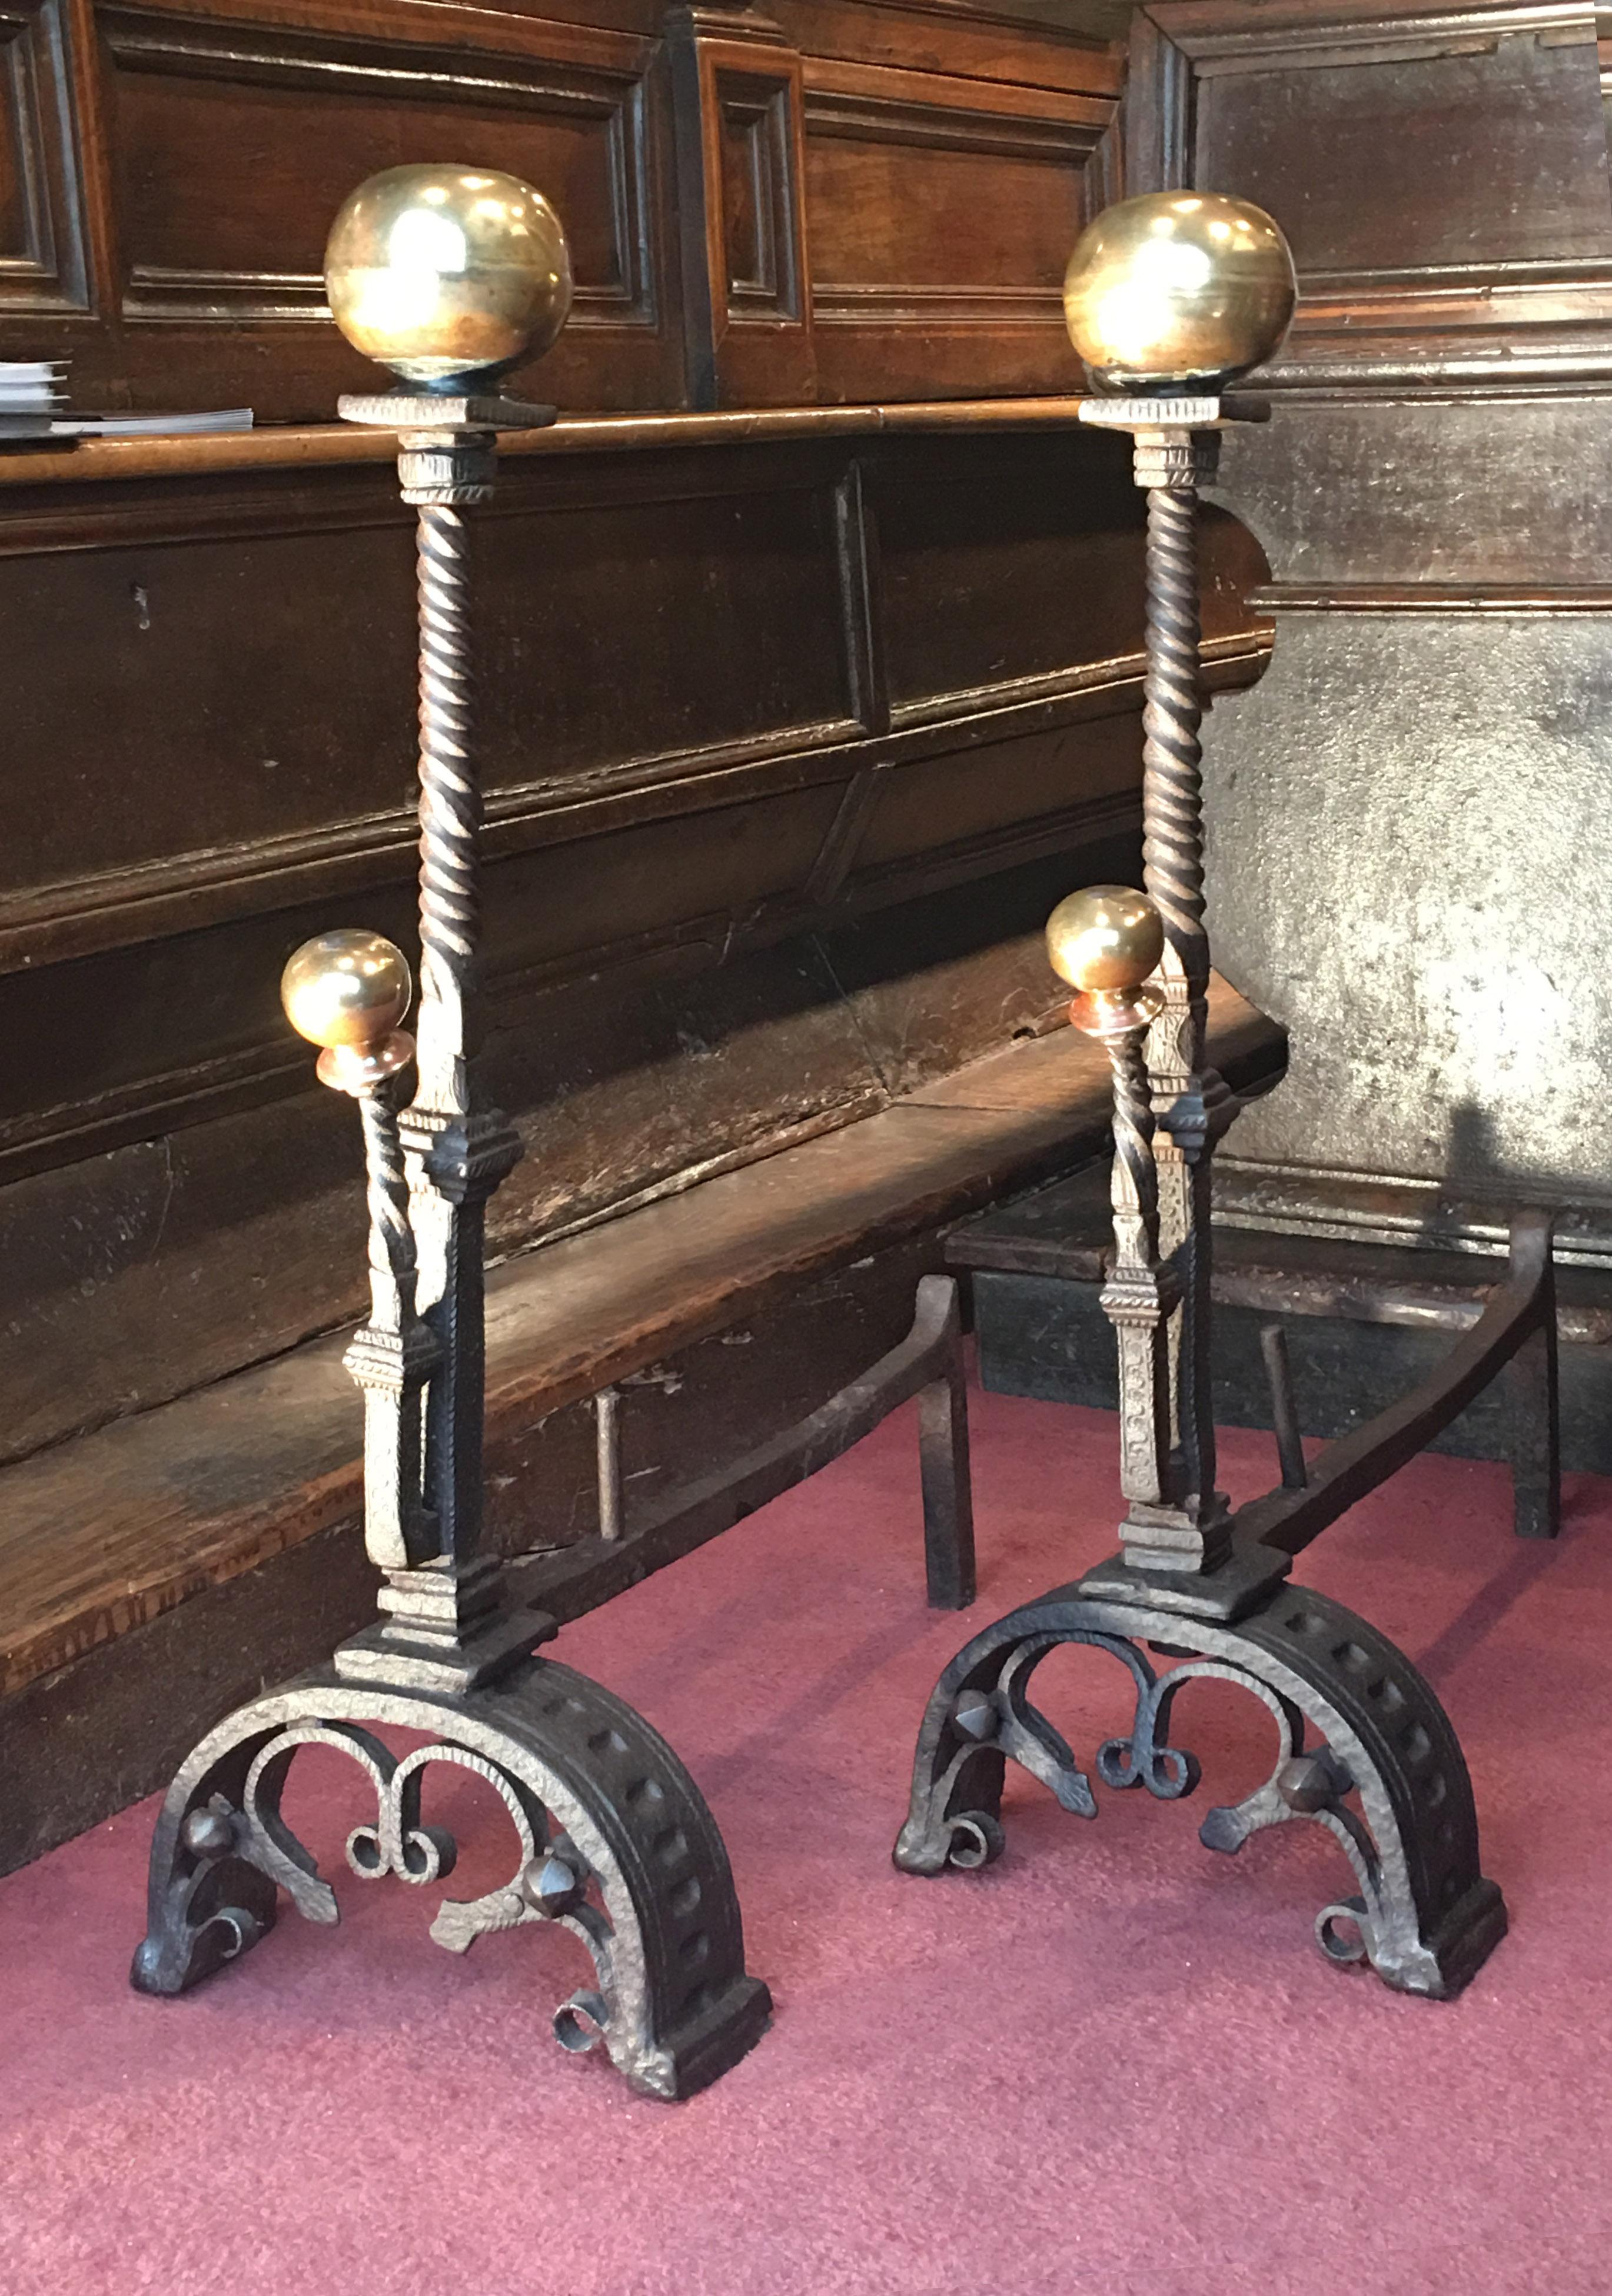 Origin: Italy, Florence

Wrought iron and bronze

A very rare pair of bronze andirons.

The base shows a grooved arcature with a decor of stylized fleur-de-lys. The square shaft is linked to the twisted upper part through a finely carved